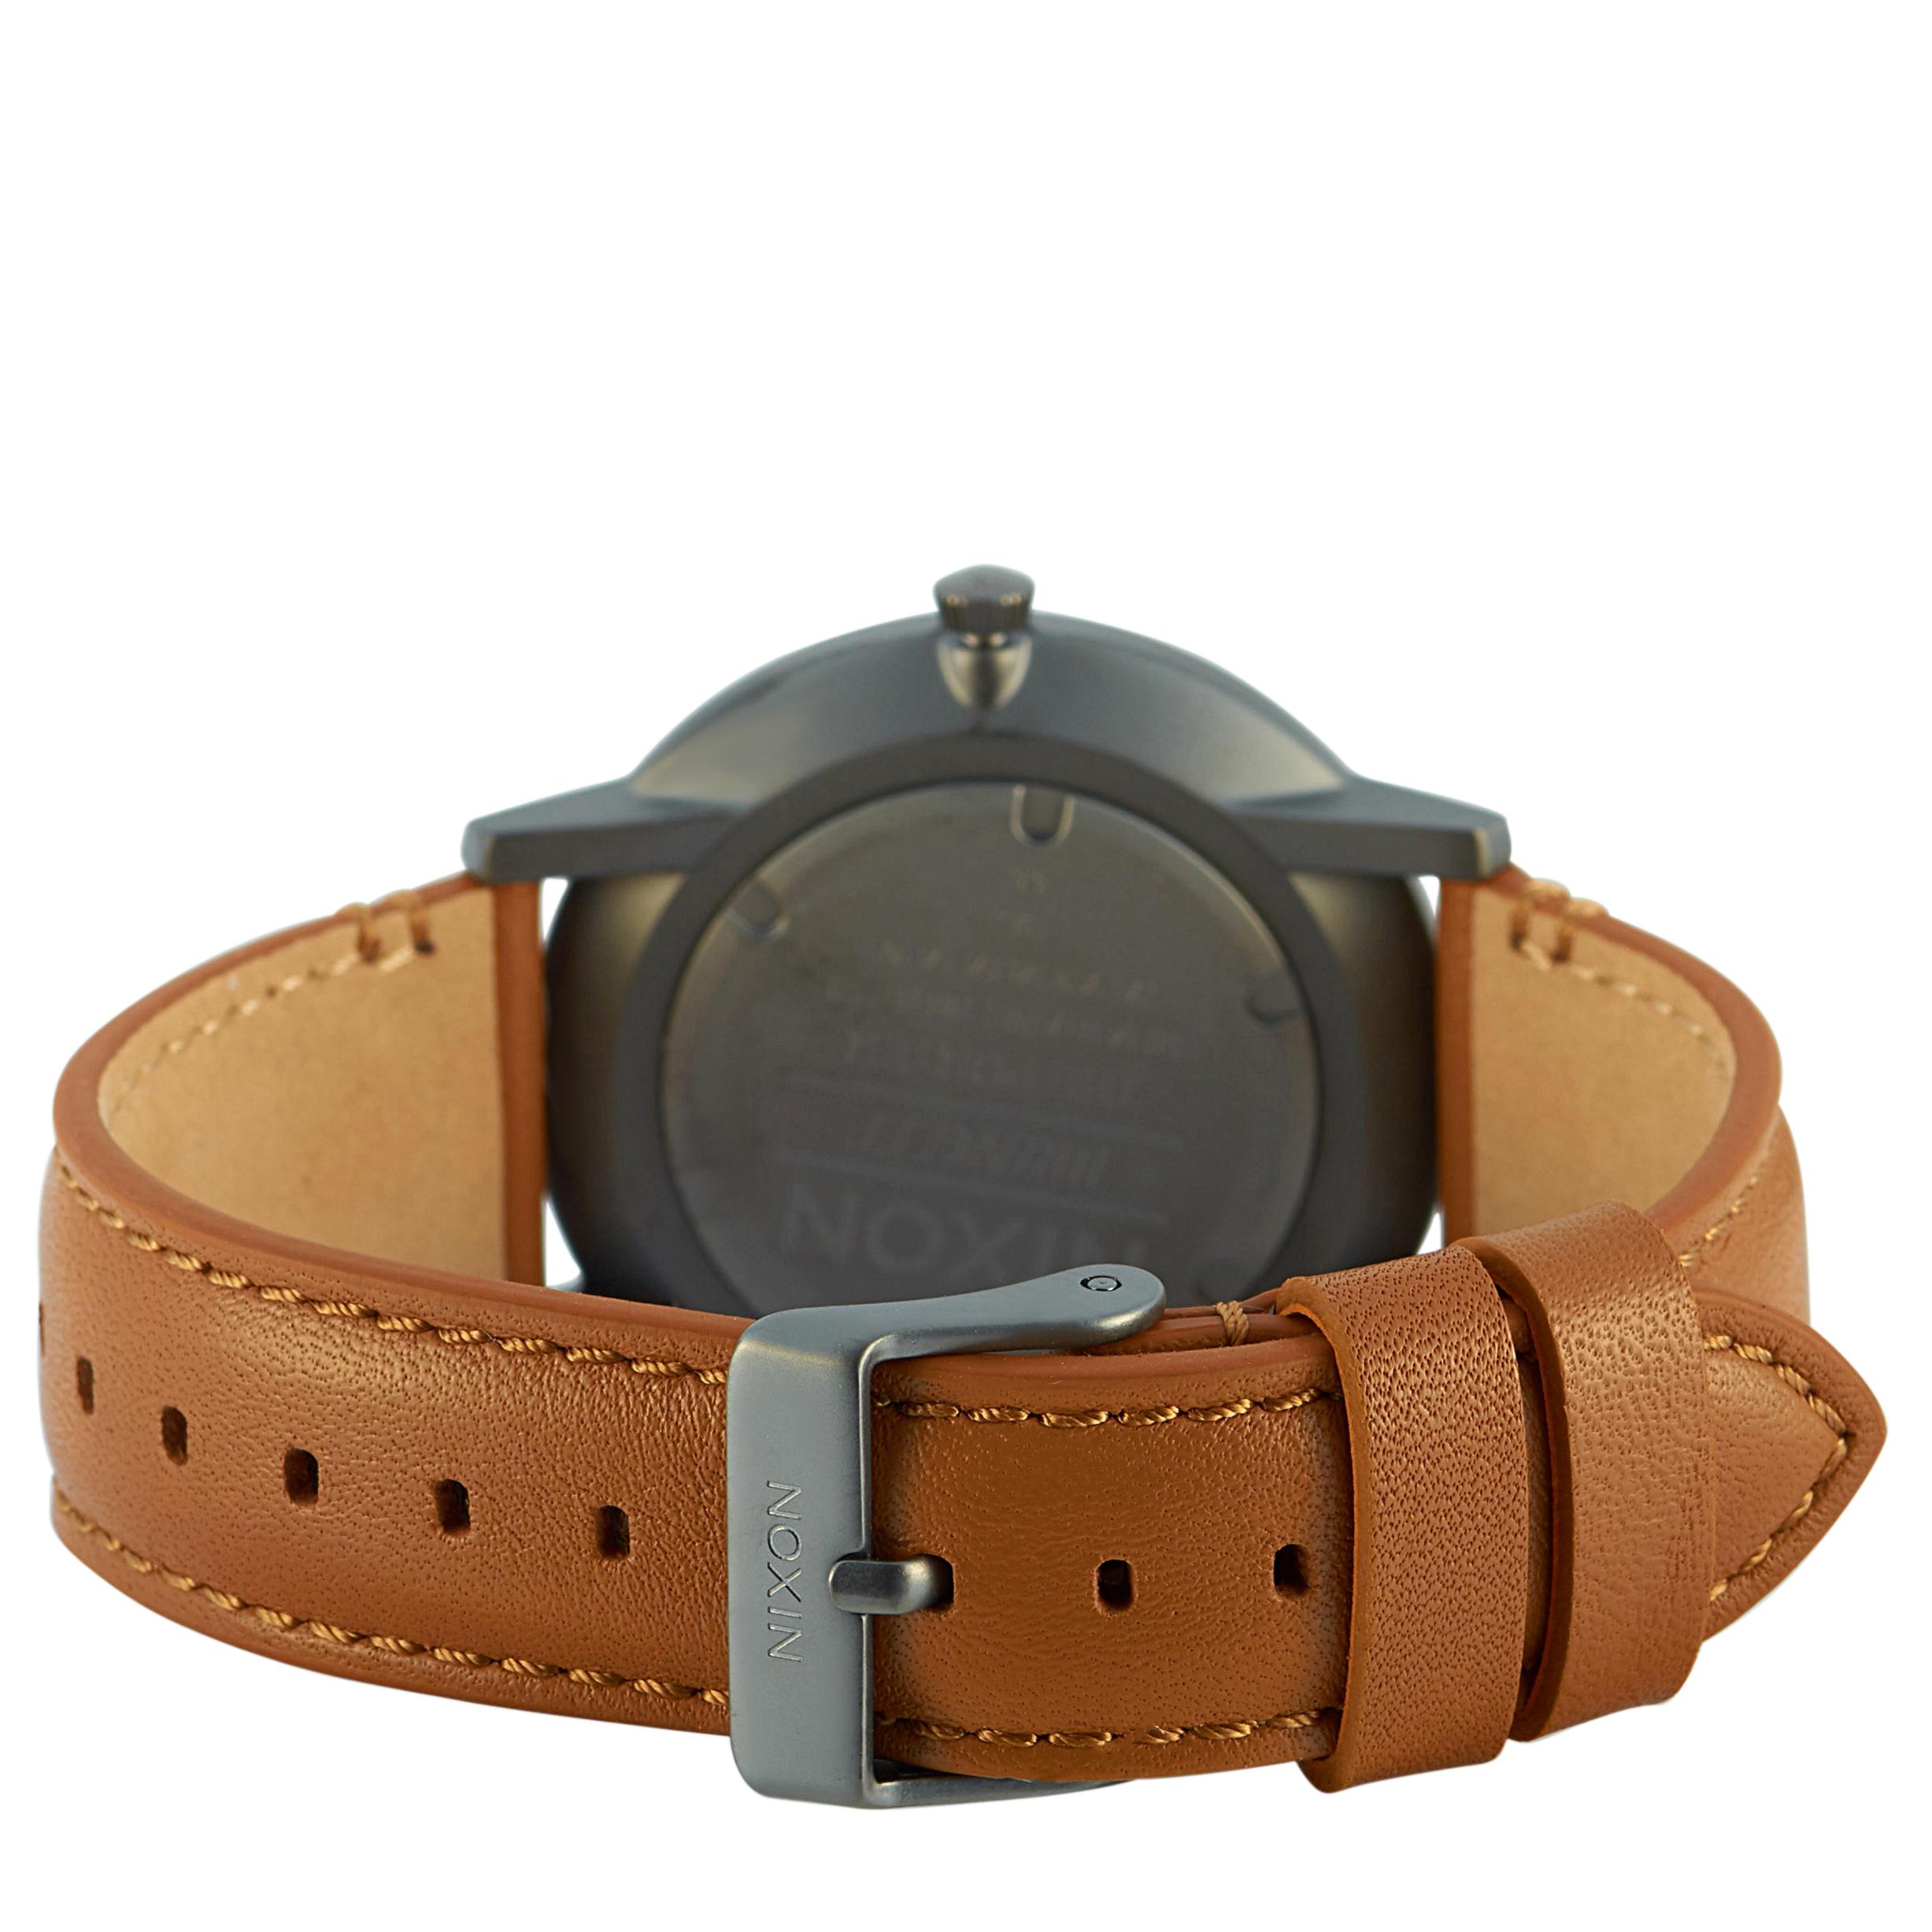 The Nixon Porter Leather Gunmetal/Charcoal/Taupe watch, reference number A1058-2494-00, comes with a 40 mm stainless steel case that is presented on a taupe brown leather strap, secured on the wrist with a tang buckle. The case is water-resistant to